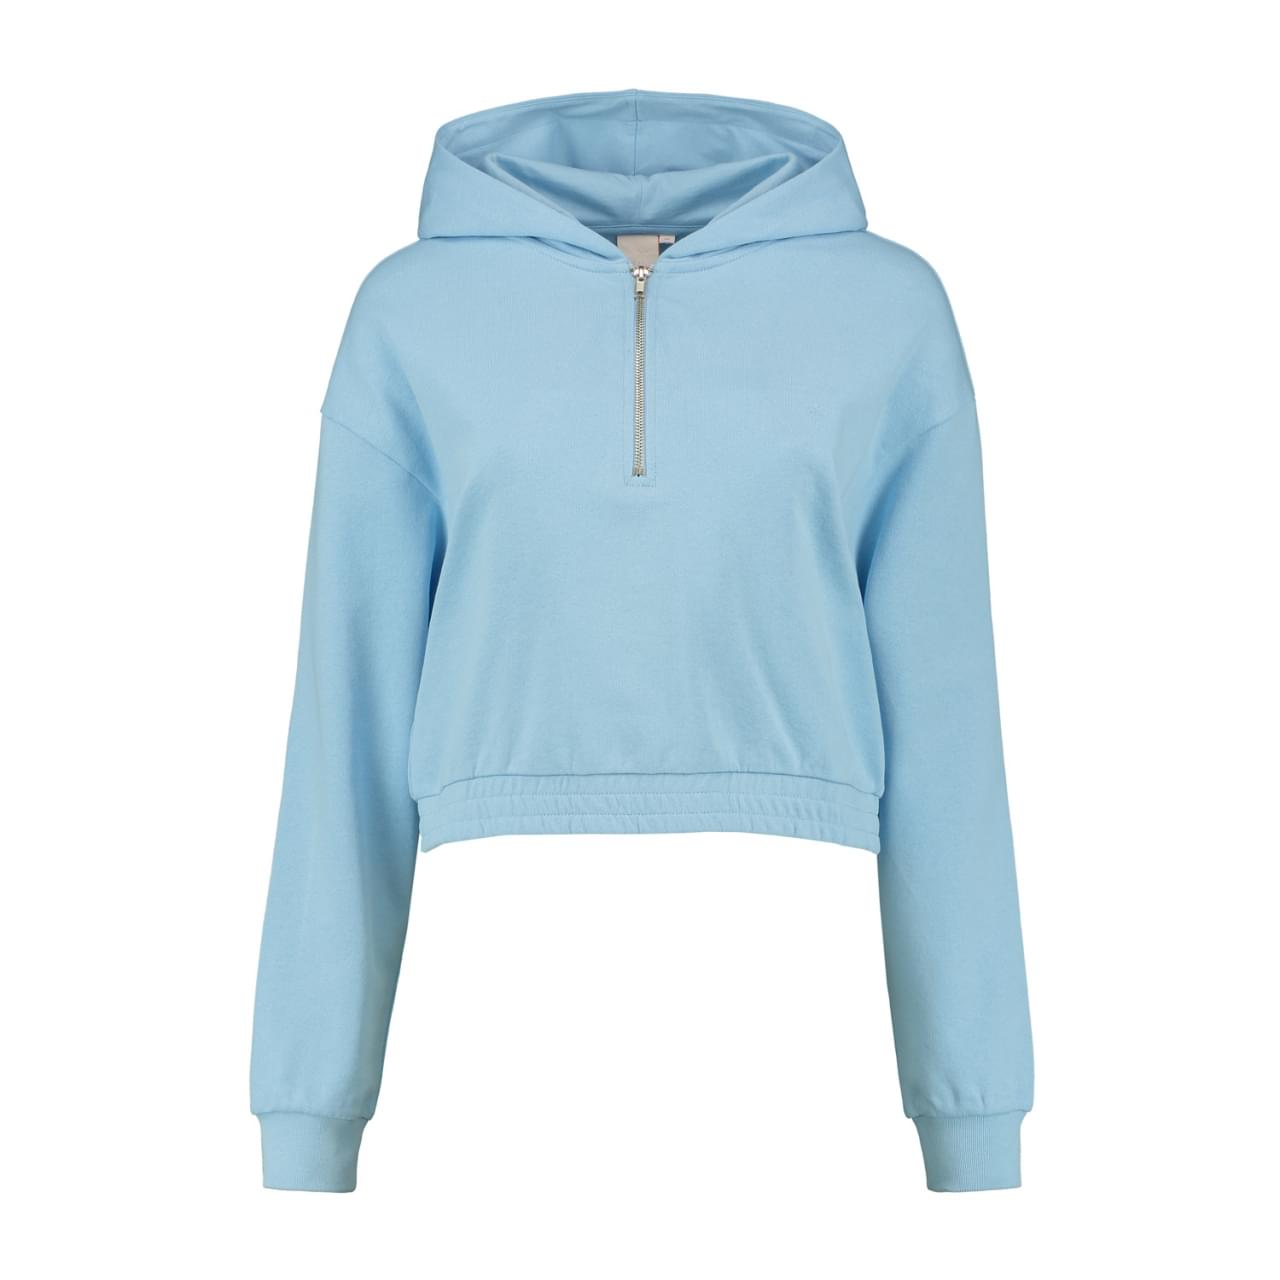 Shiwi Hoodie Quito - light summer blue - S